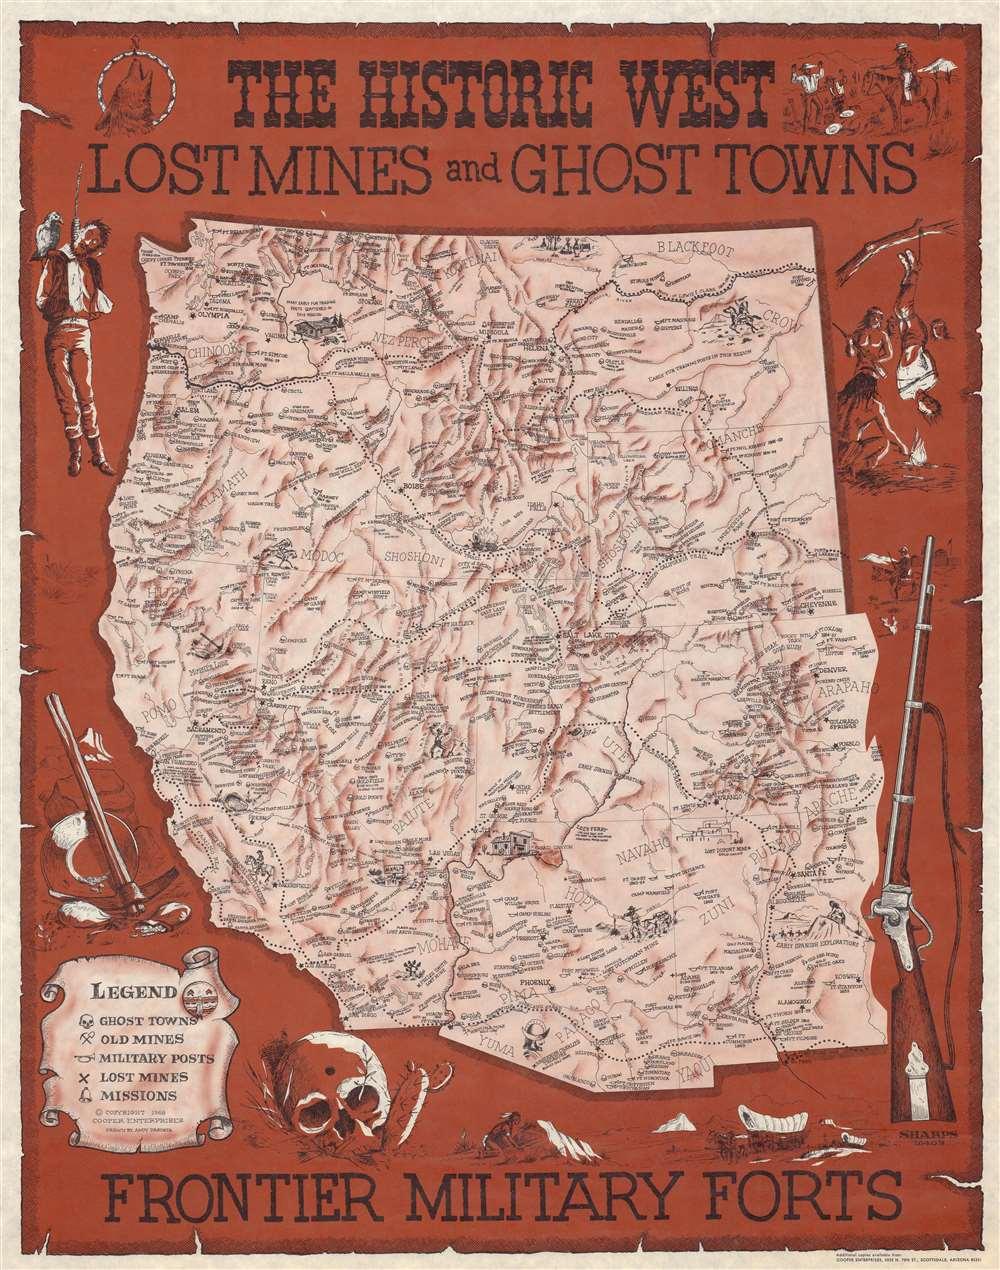 The Historic West. Lost Mines and Ghost Towns, Frontier Military Forts. - Main View